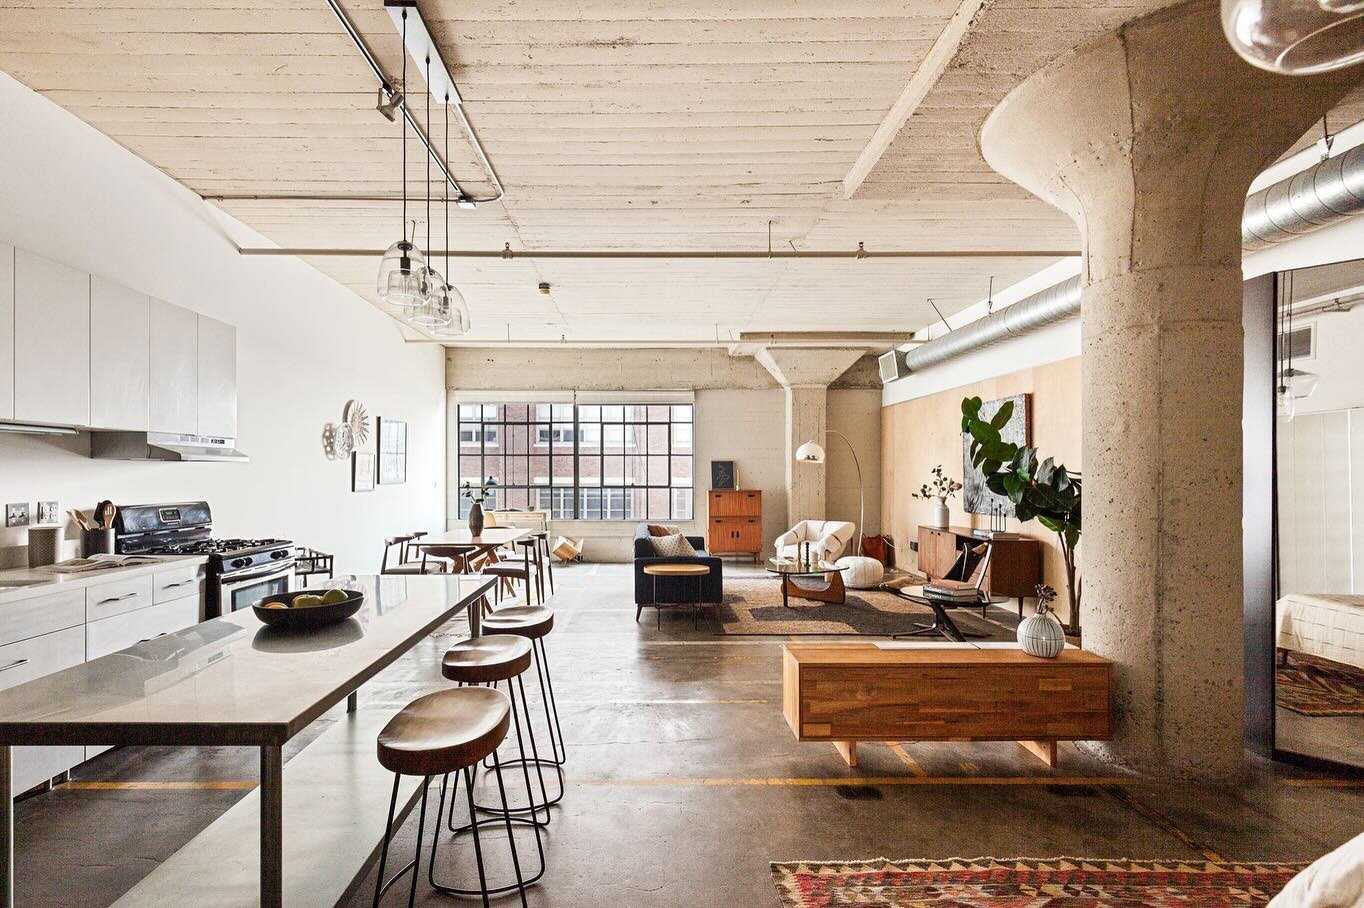 Just listed ! 🧸

Light &amp; bright live/work loft in the historic Toy Factory Lofts. Polished concrete floors, large industrial style windows that take in the city, and updated amenities for chic, modern living. In a great building with 24-hour sec